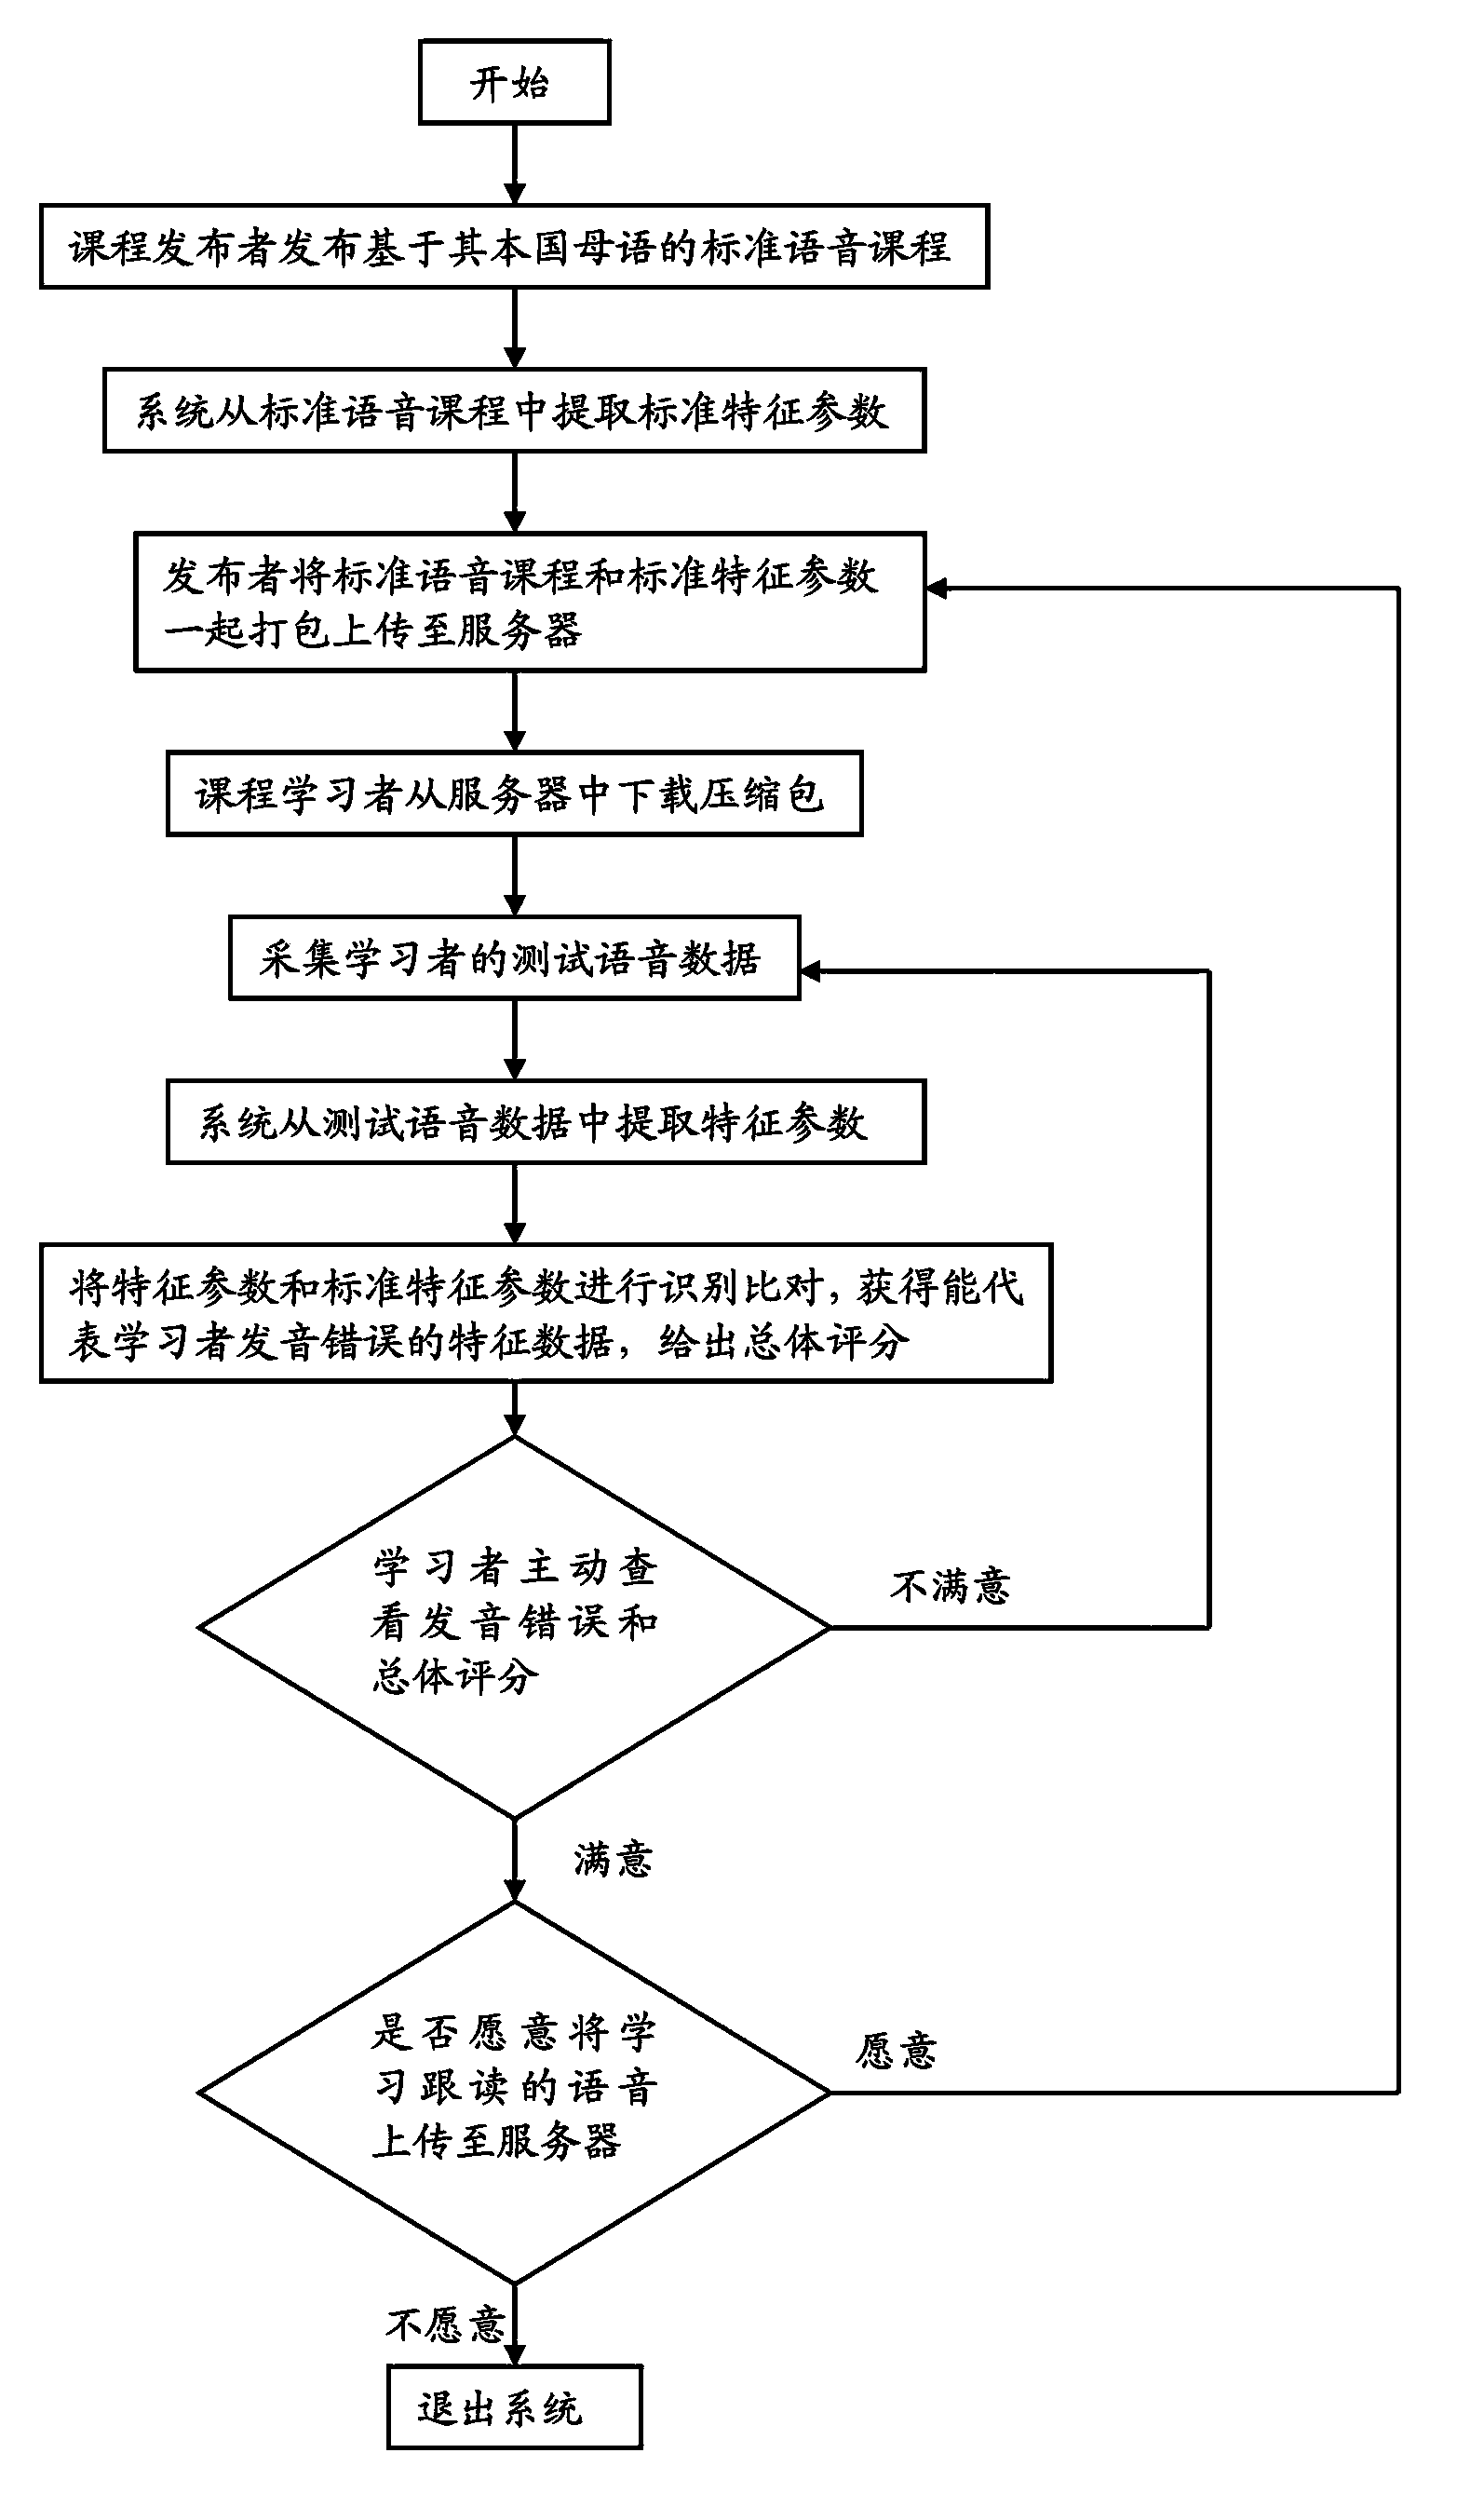 Man-machine interactive language learning system and method